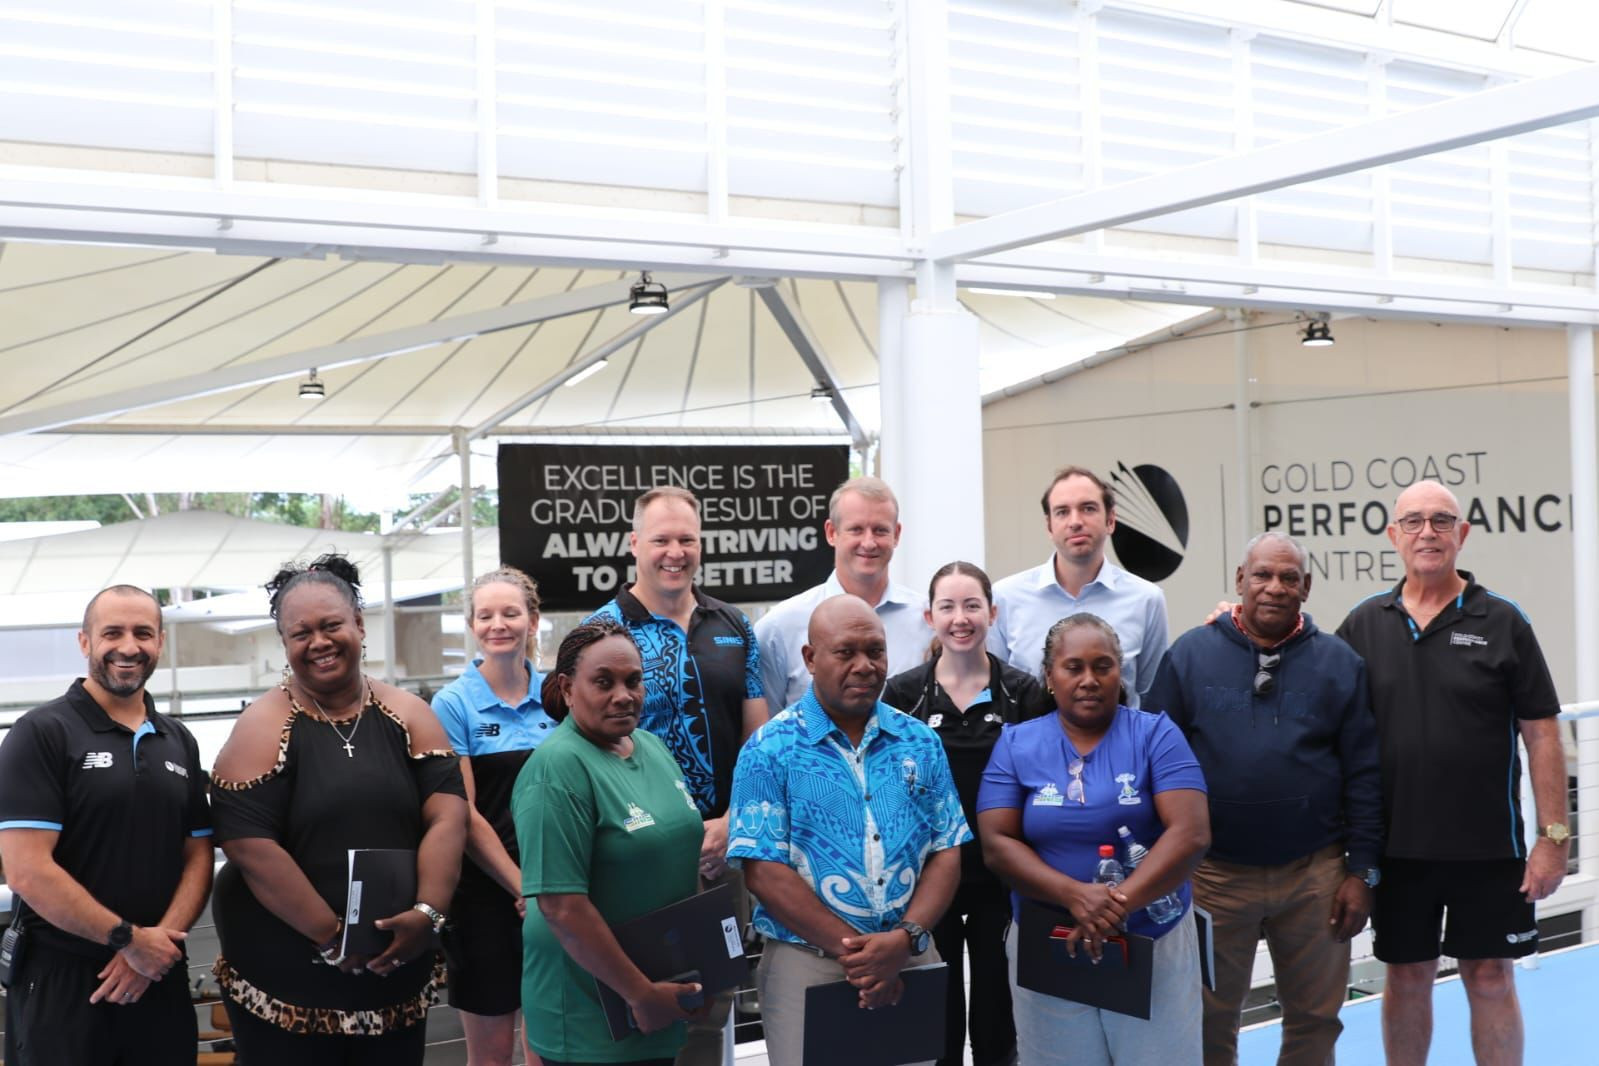 More than 800 Solomon Islands athletes will prepare for the 2023 Pacific Games in their country by training in Australia's Gold Coast ©Rod Hilton/Twitter